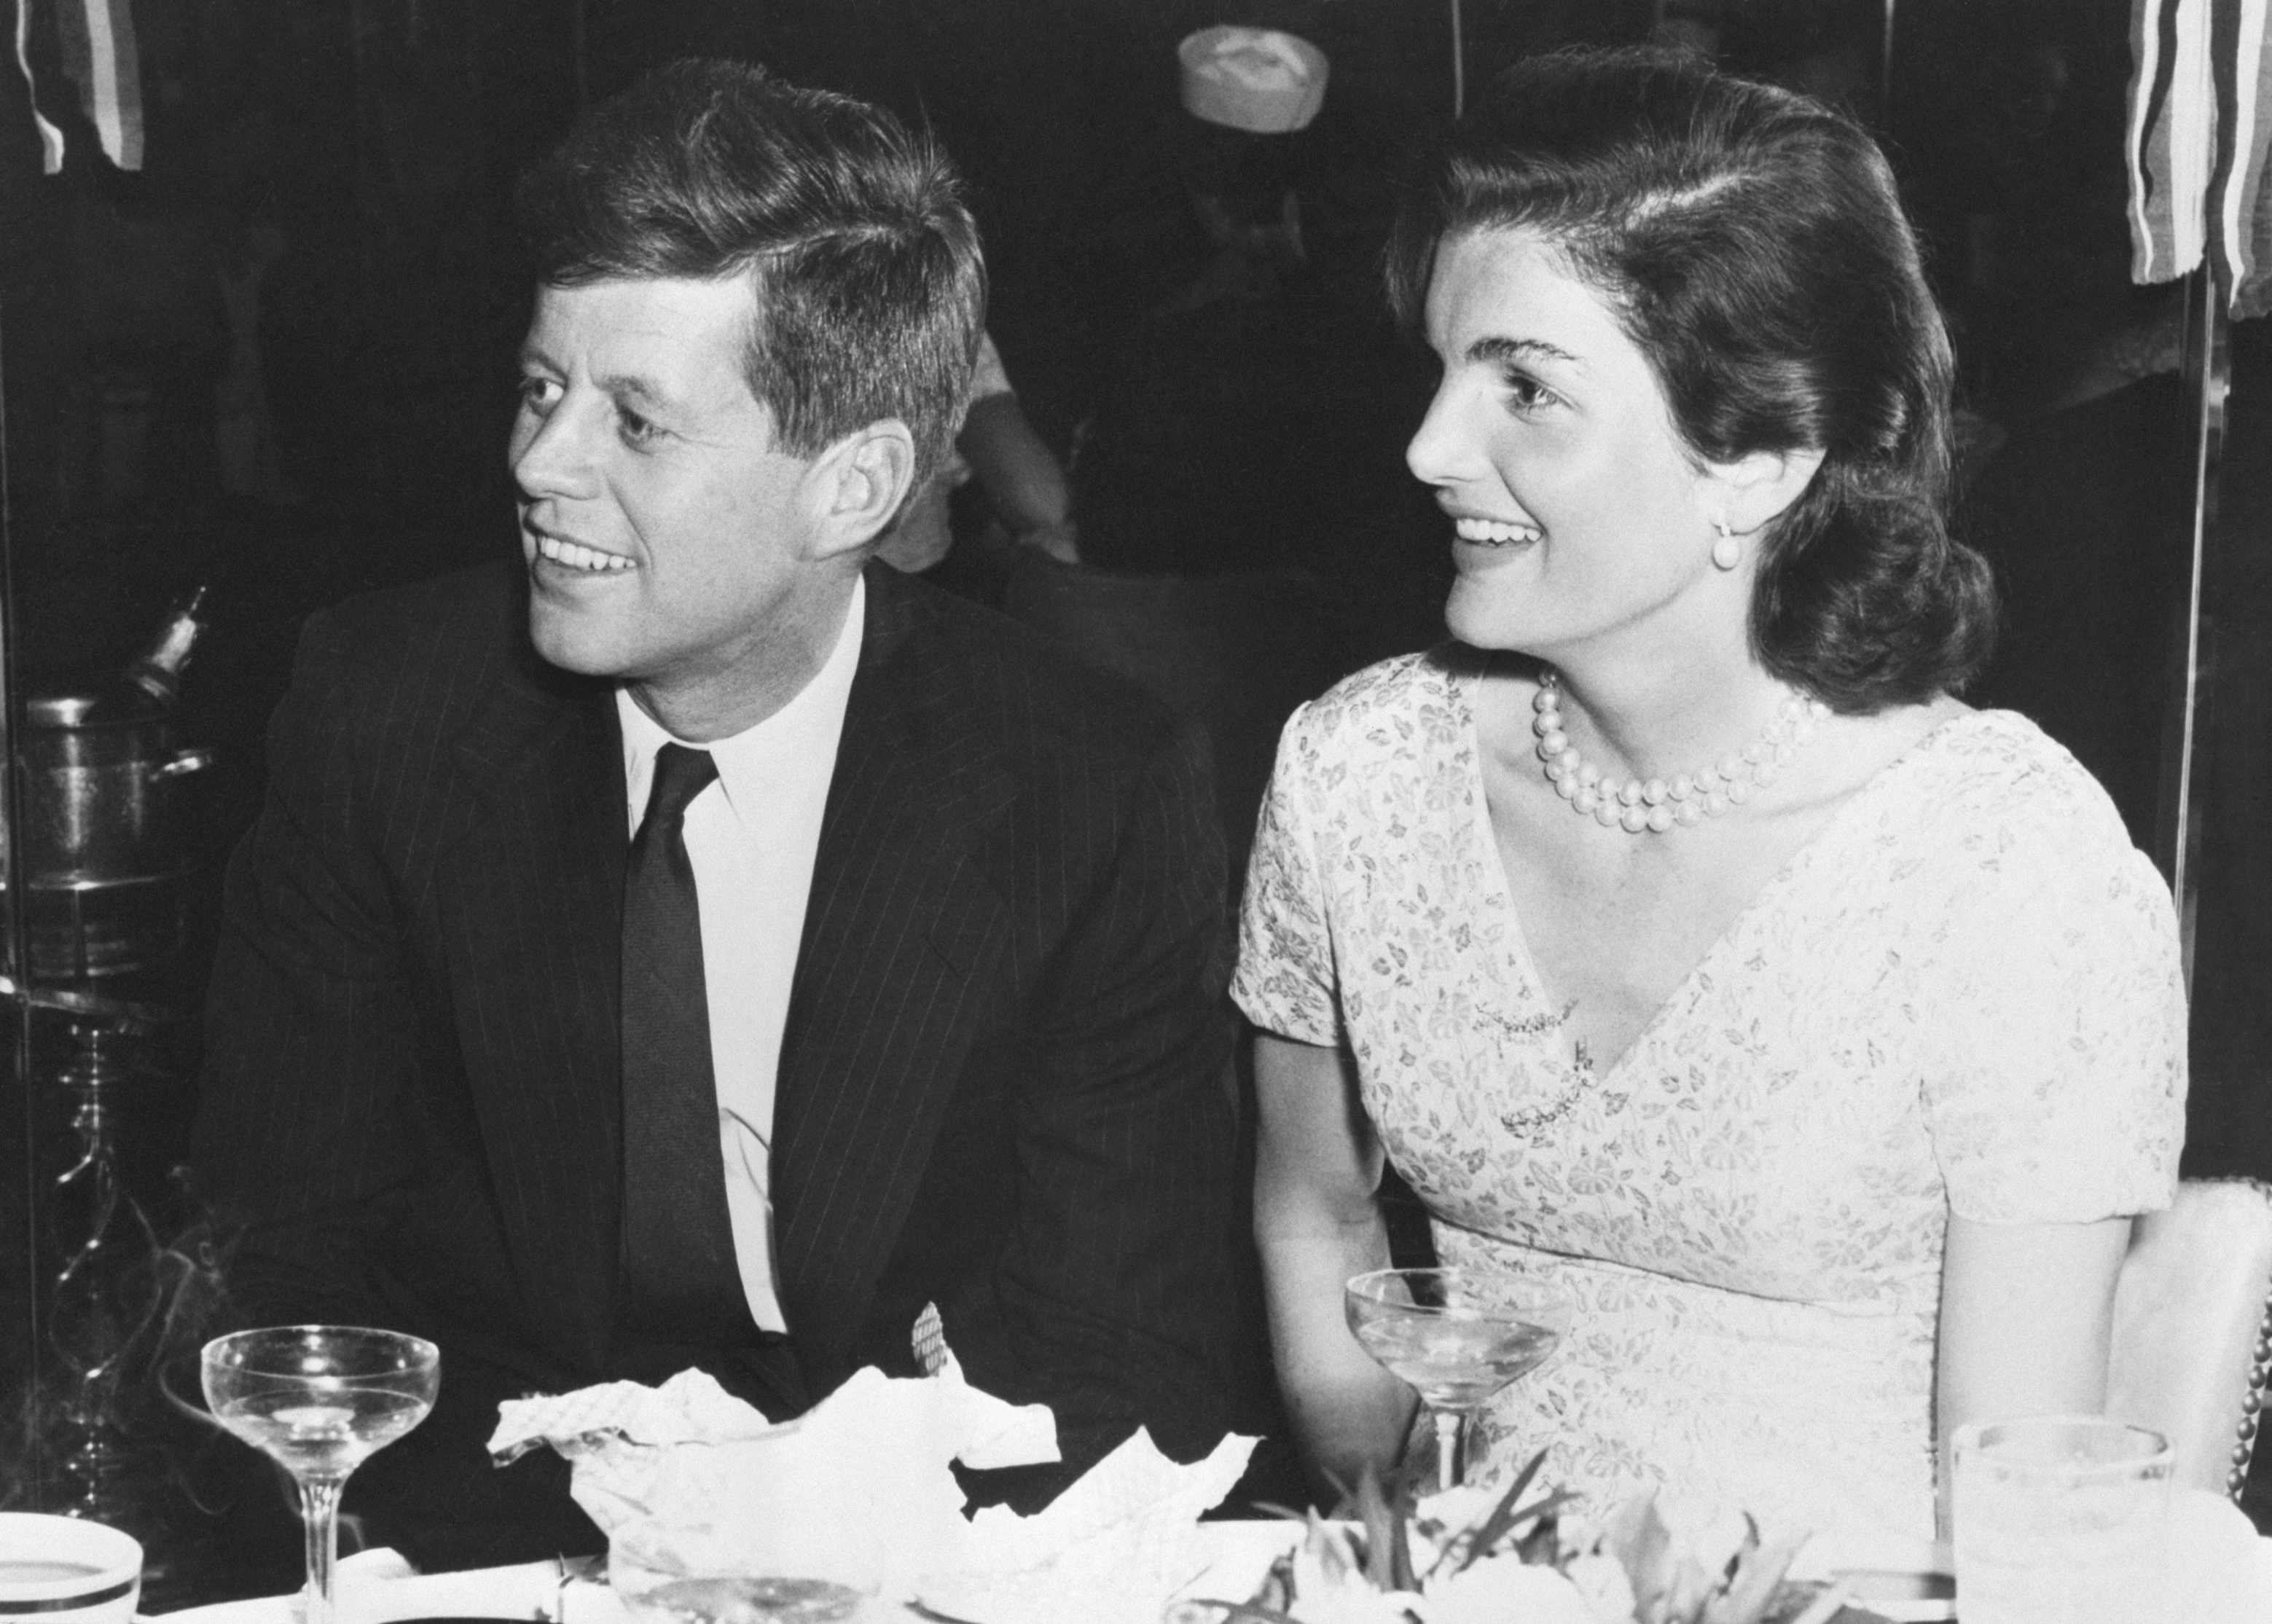 JFK and Jacqueline Kennedy at a table